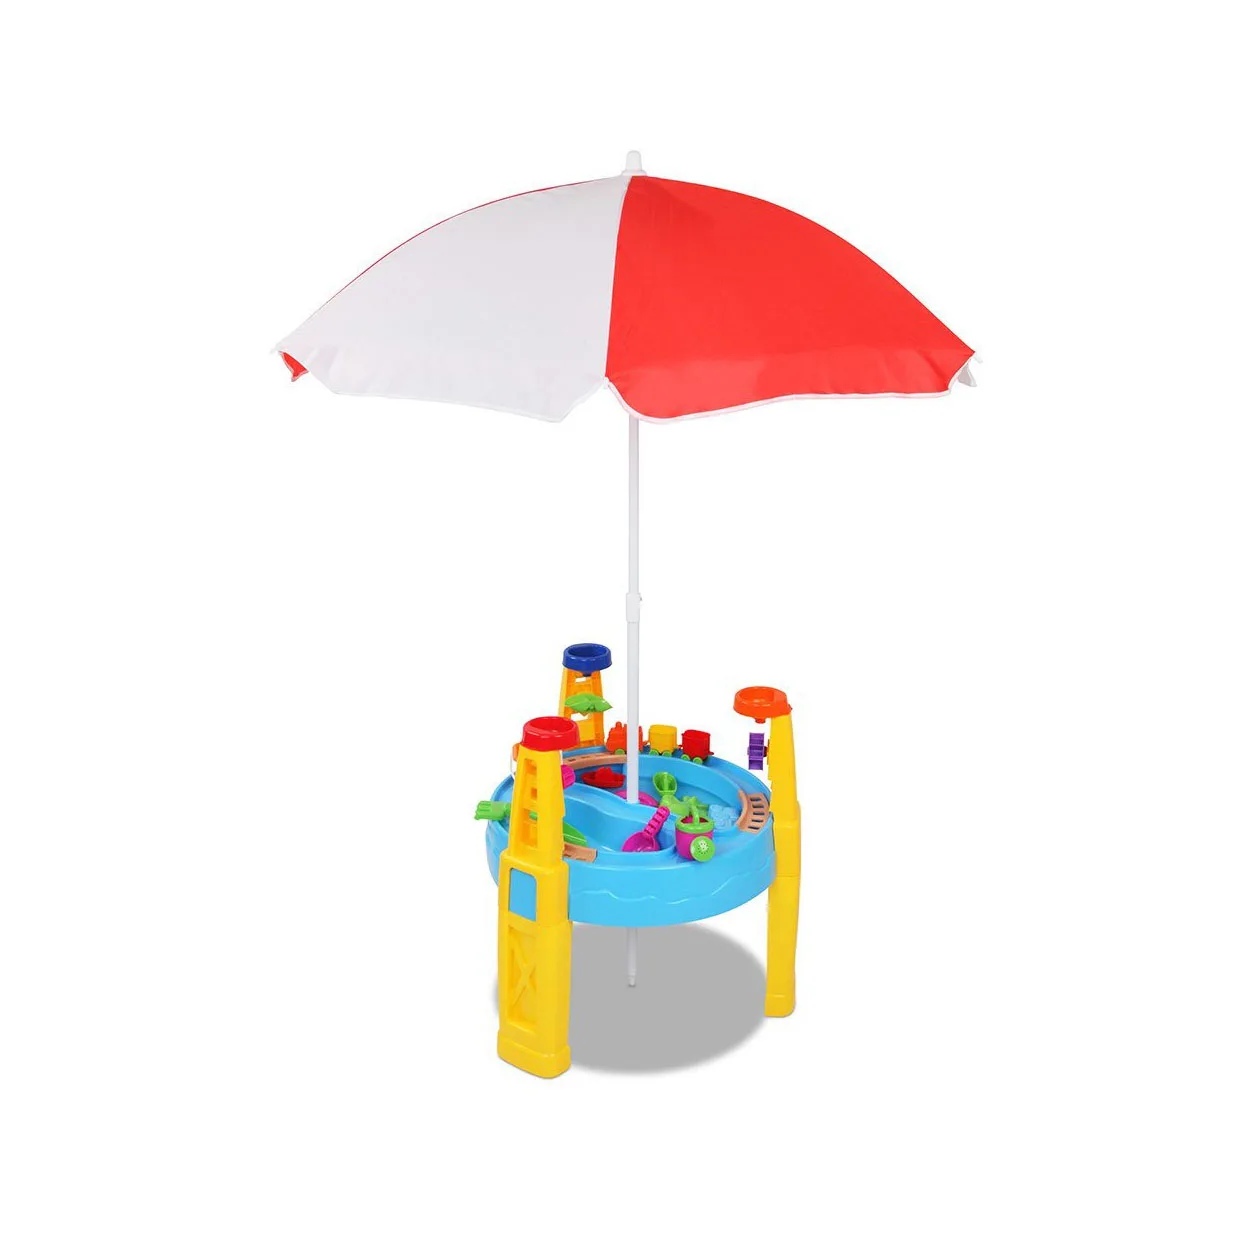 Kids Outdoor  Sand and Water Table Play Set Toys Beach Sandpit Summer 